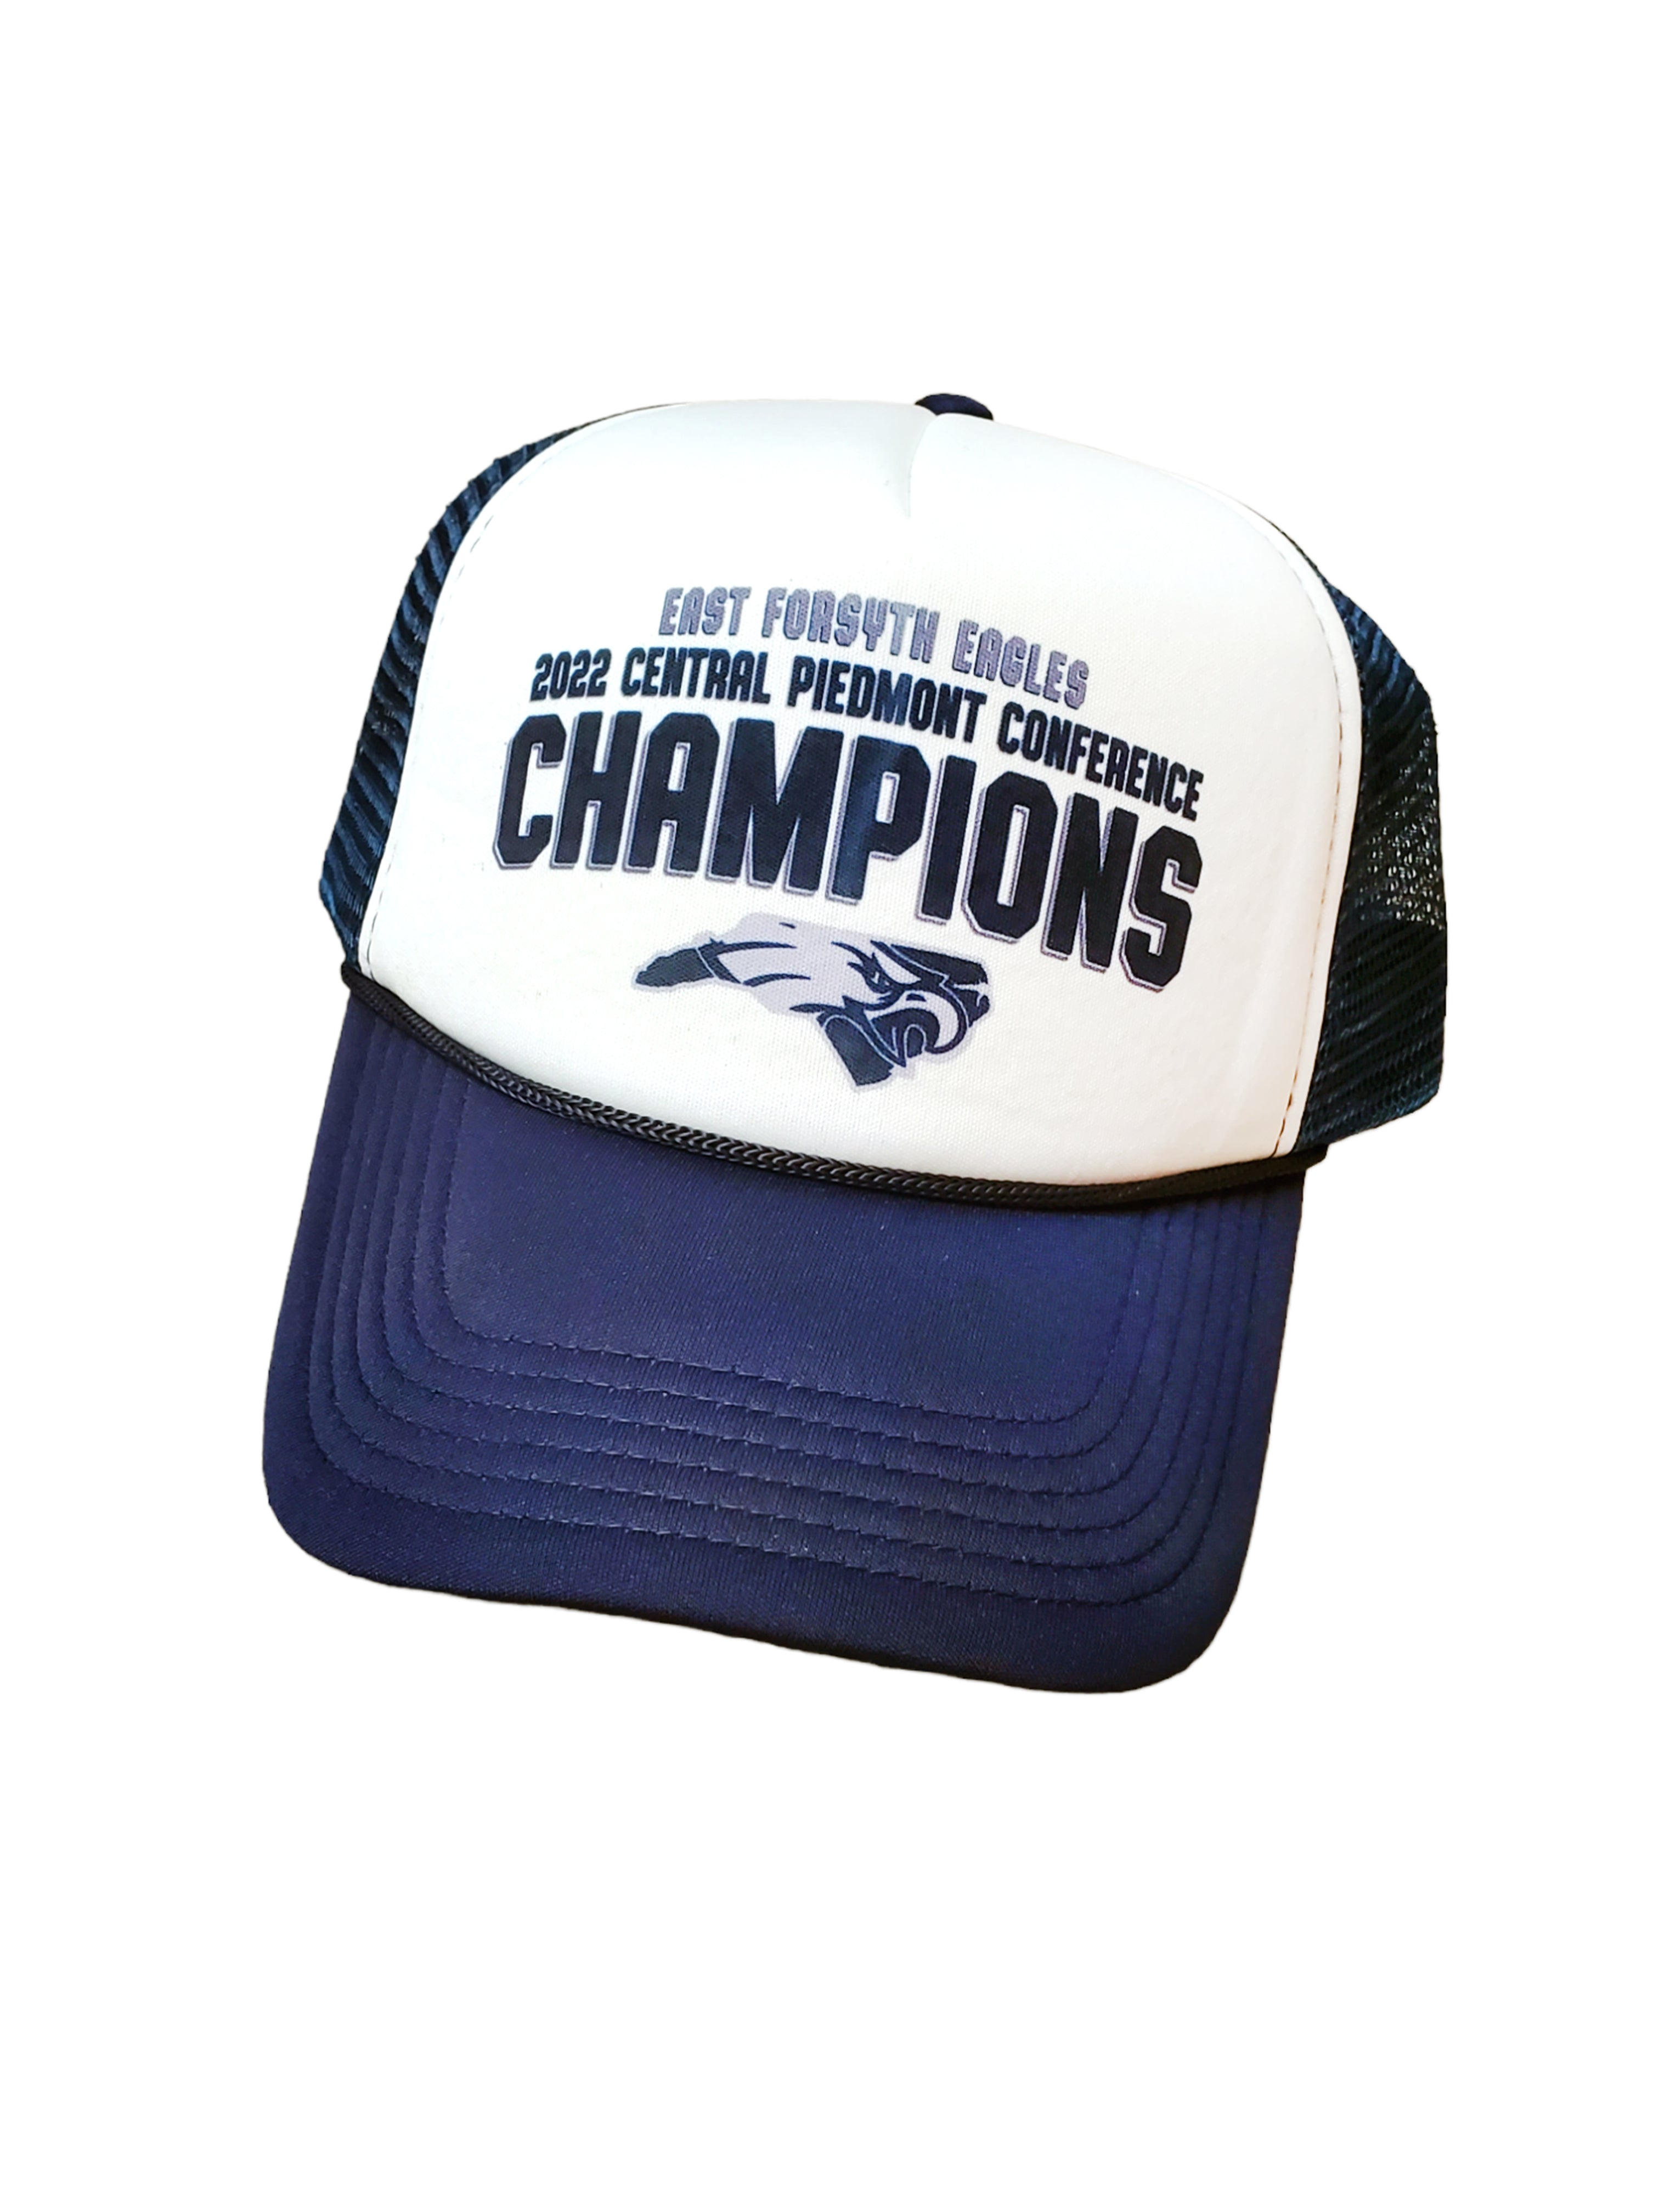 2022 Central Piedmont Conference Champions Trucker Hat, Navy blue